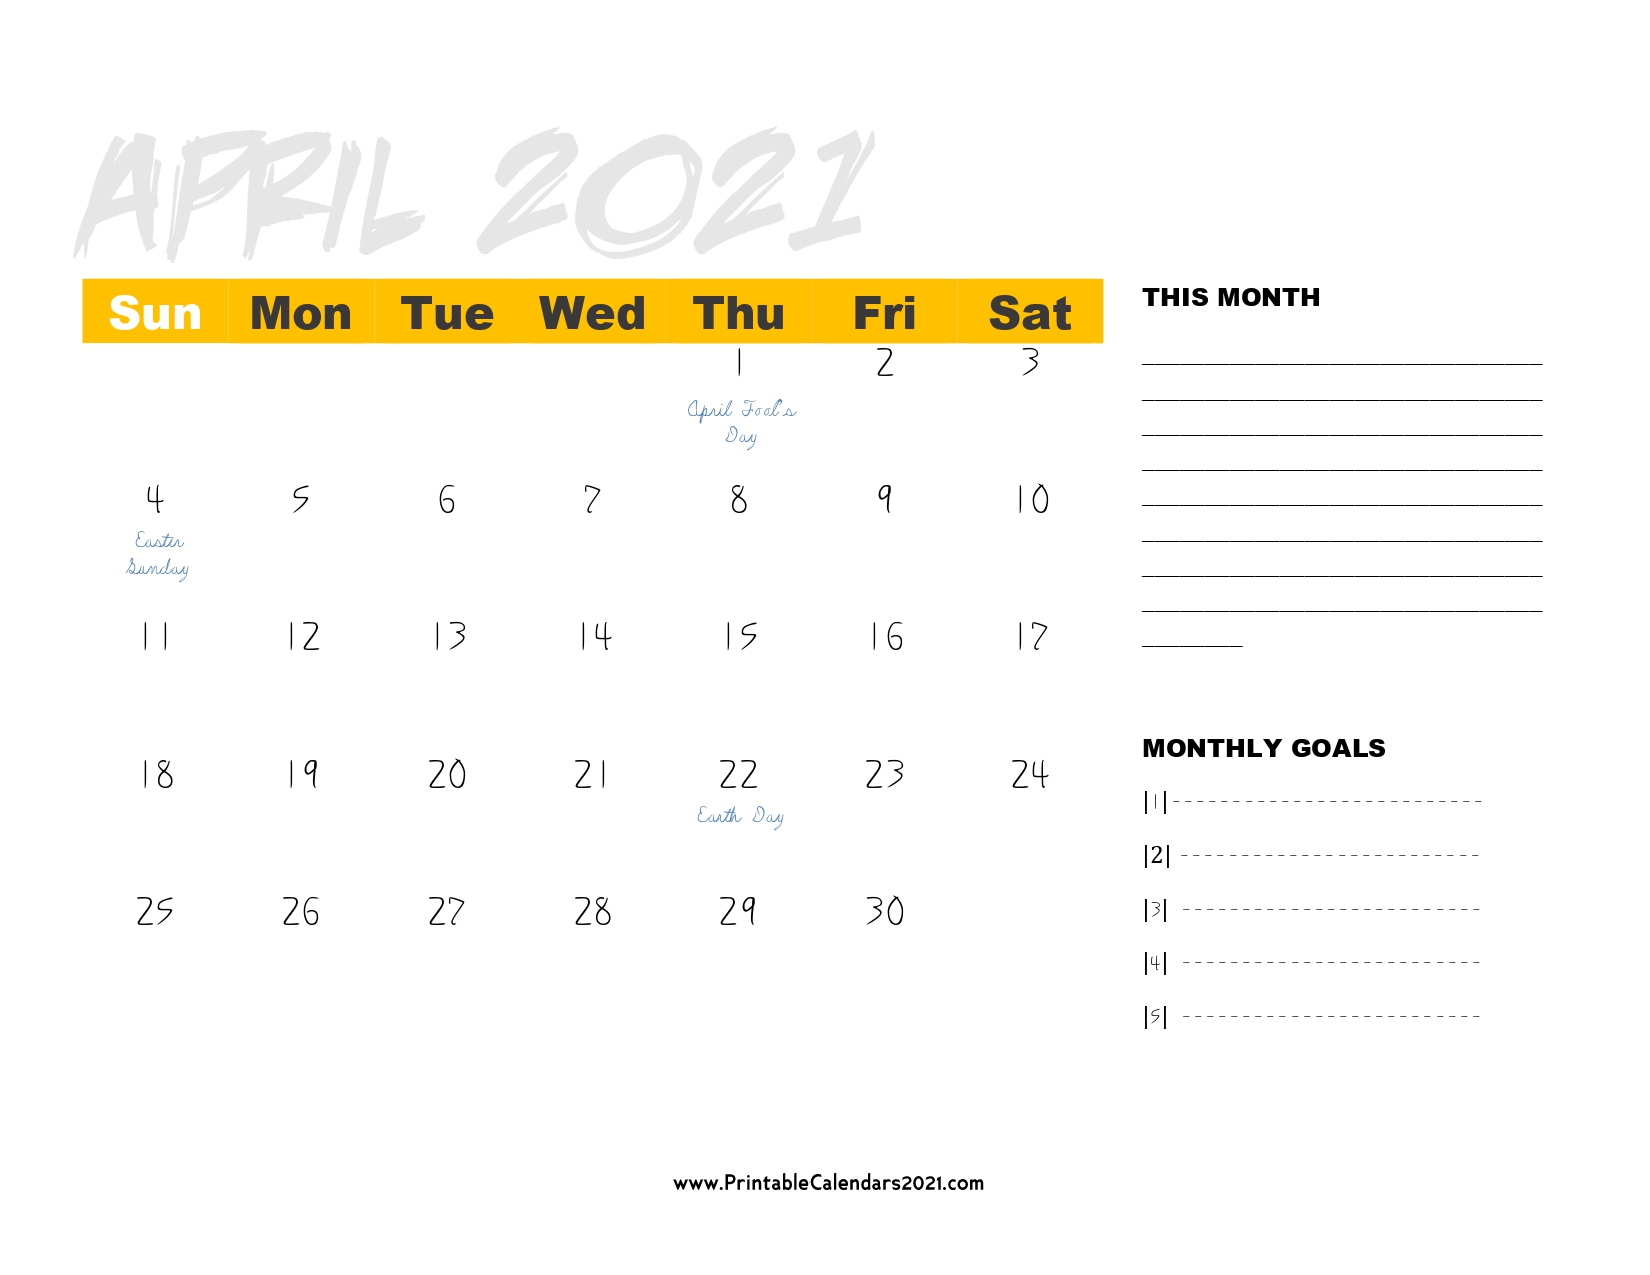 Introducing Different Types of Monthly Printable Calendar Template for the Year 2021